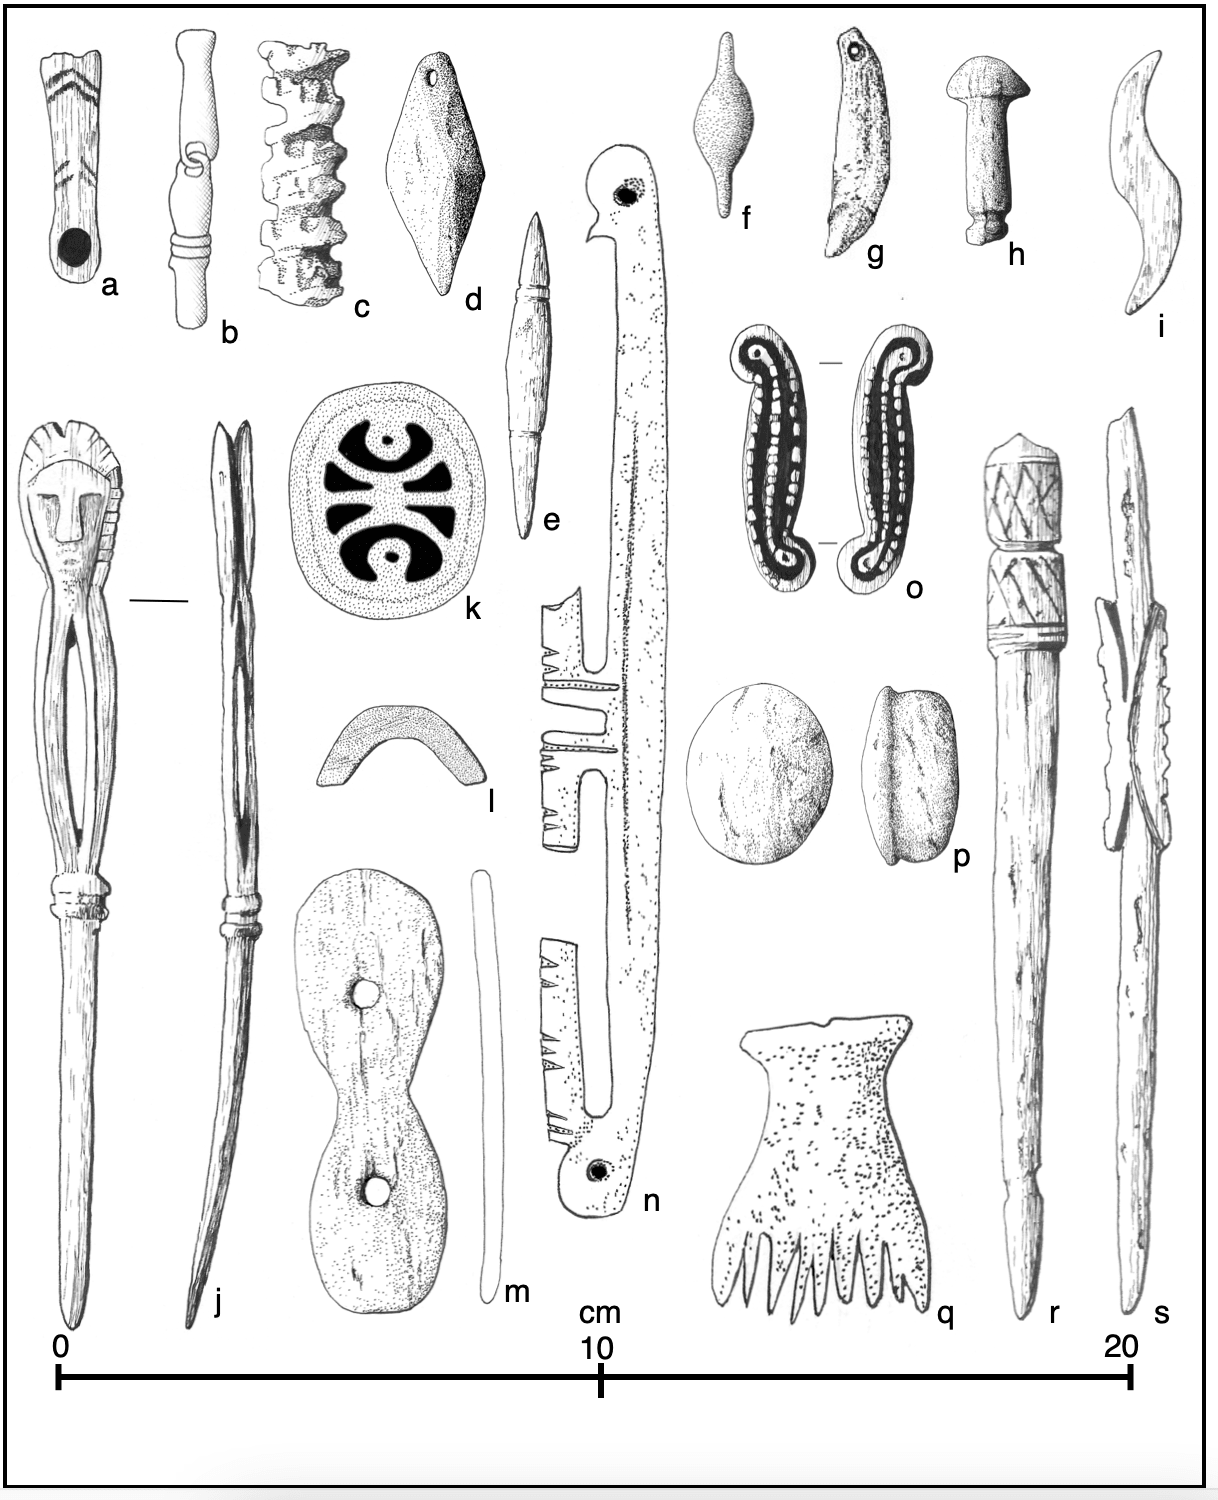 This drawing or image or illustration or depiction of labrets, combs and strange objects